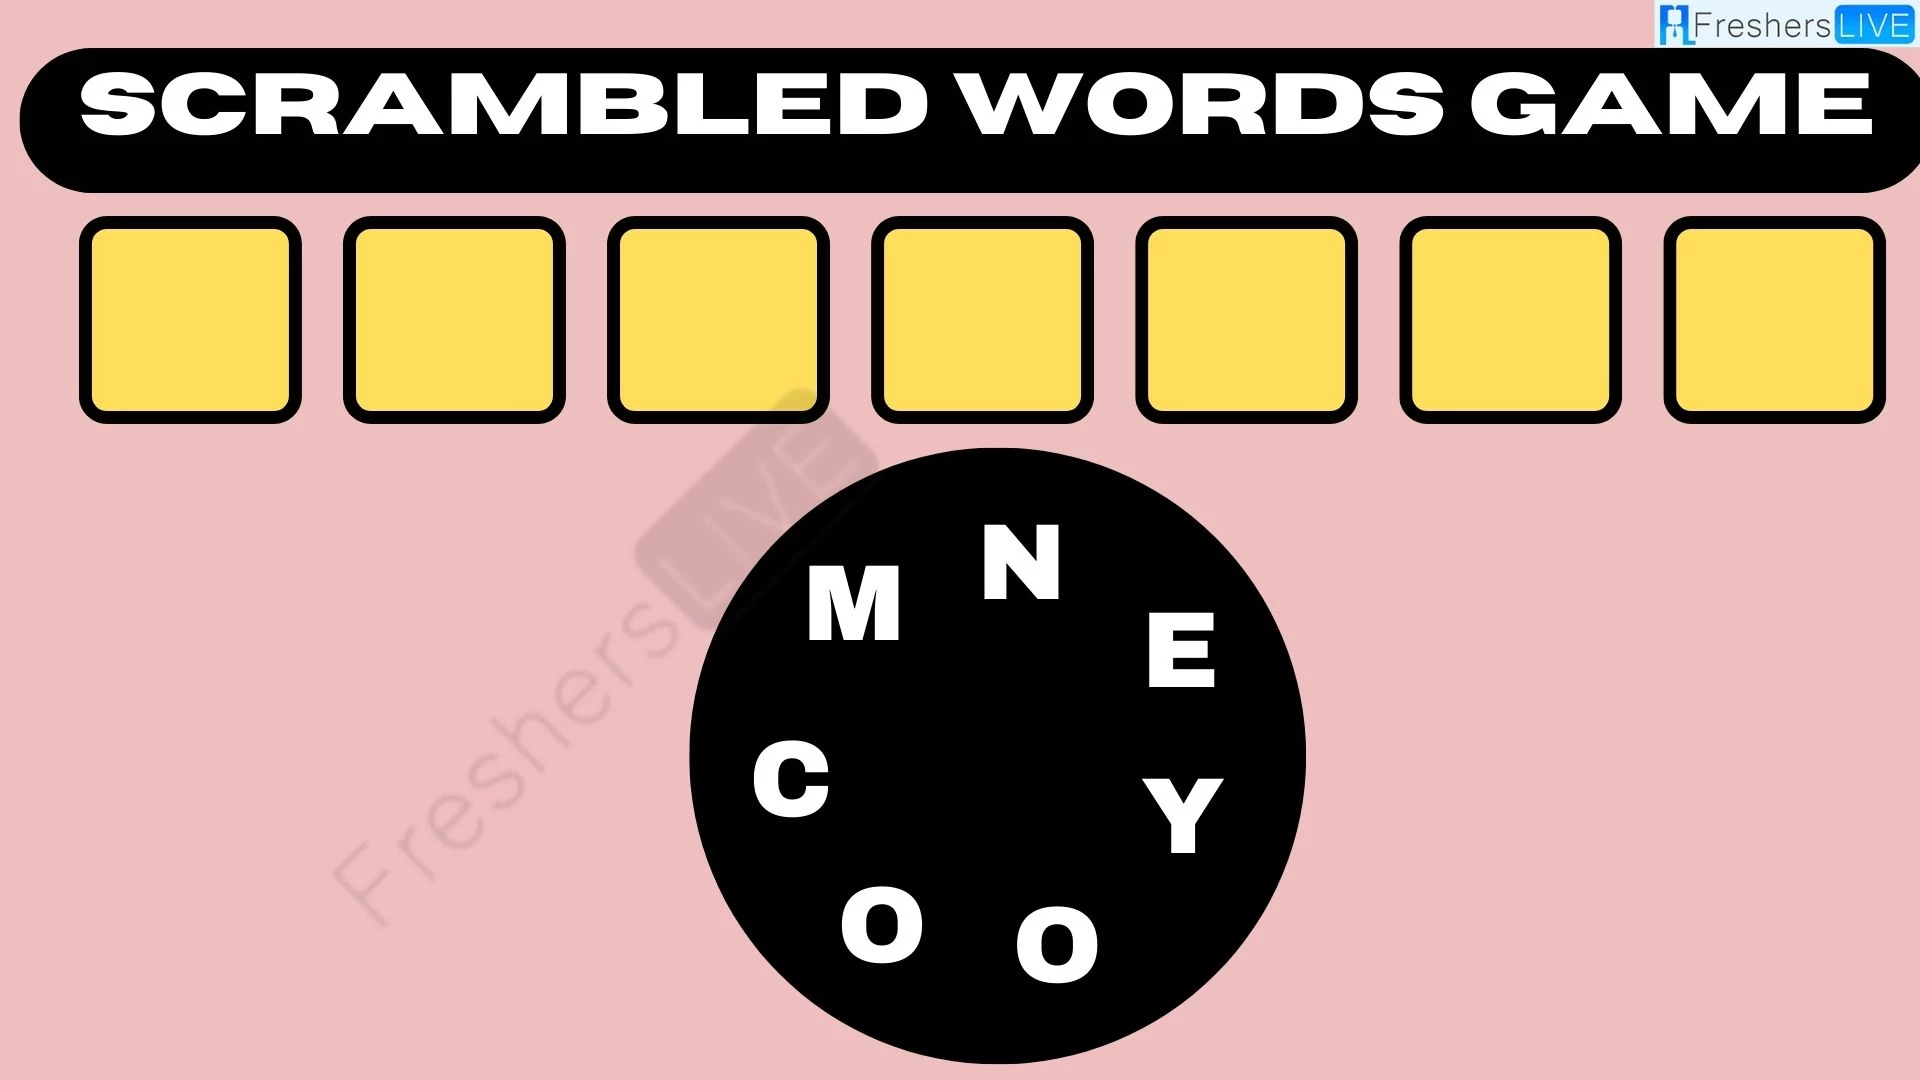 Can you figure out the scrambled words in this word game?